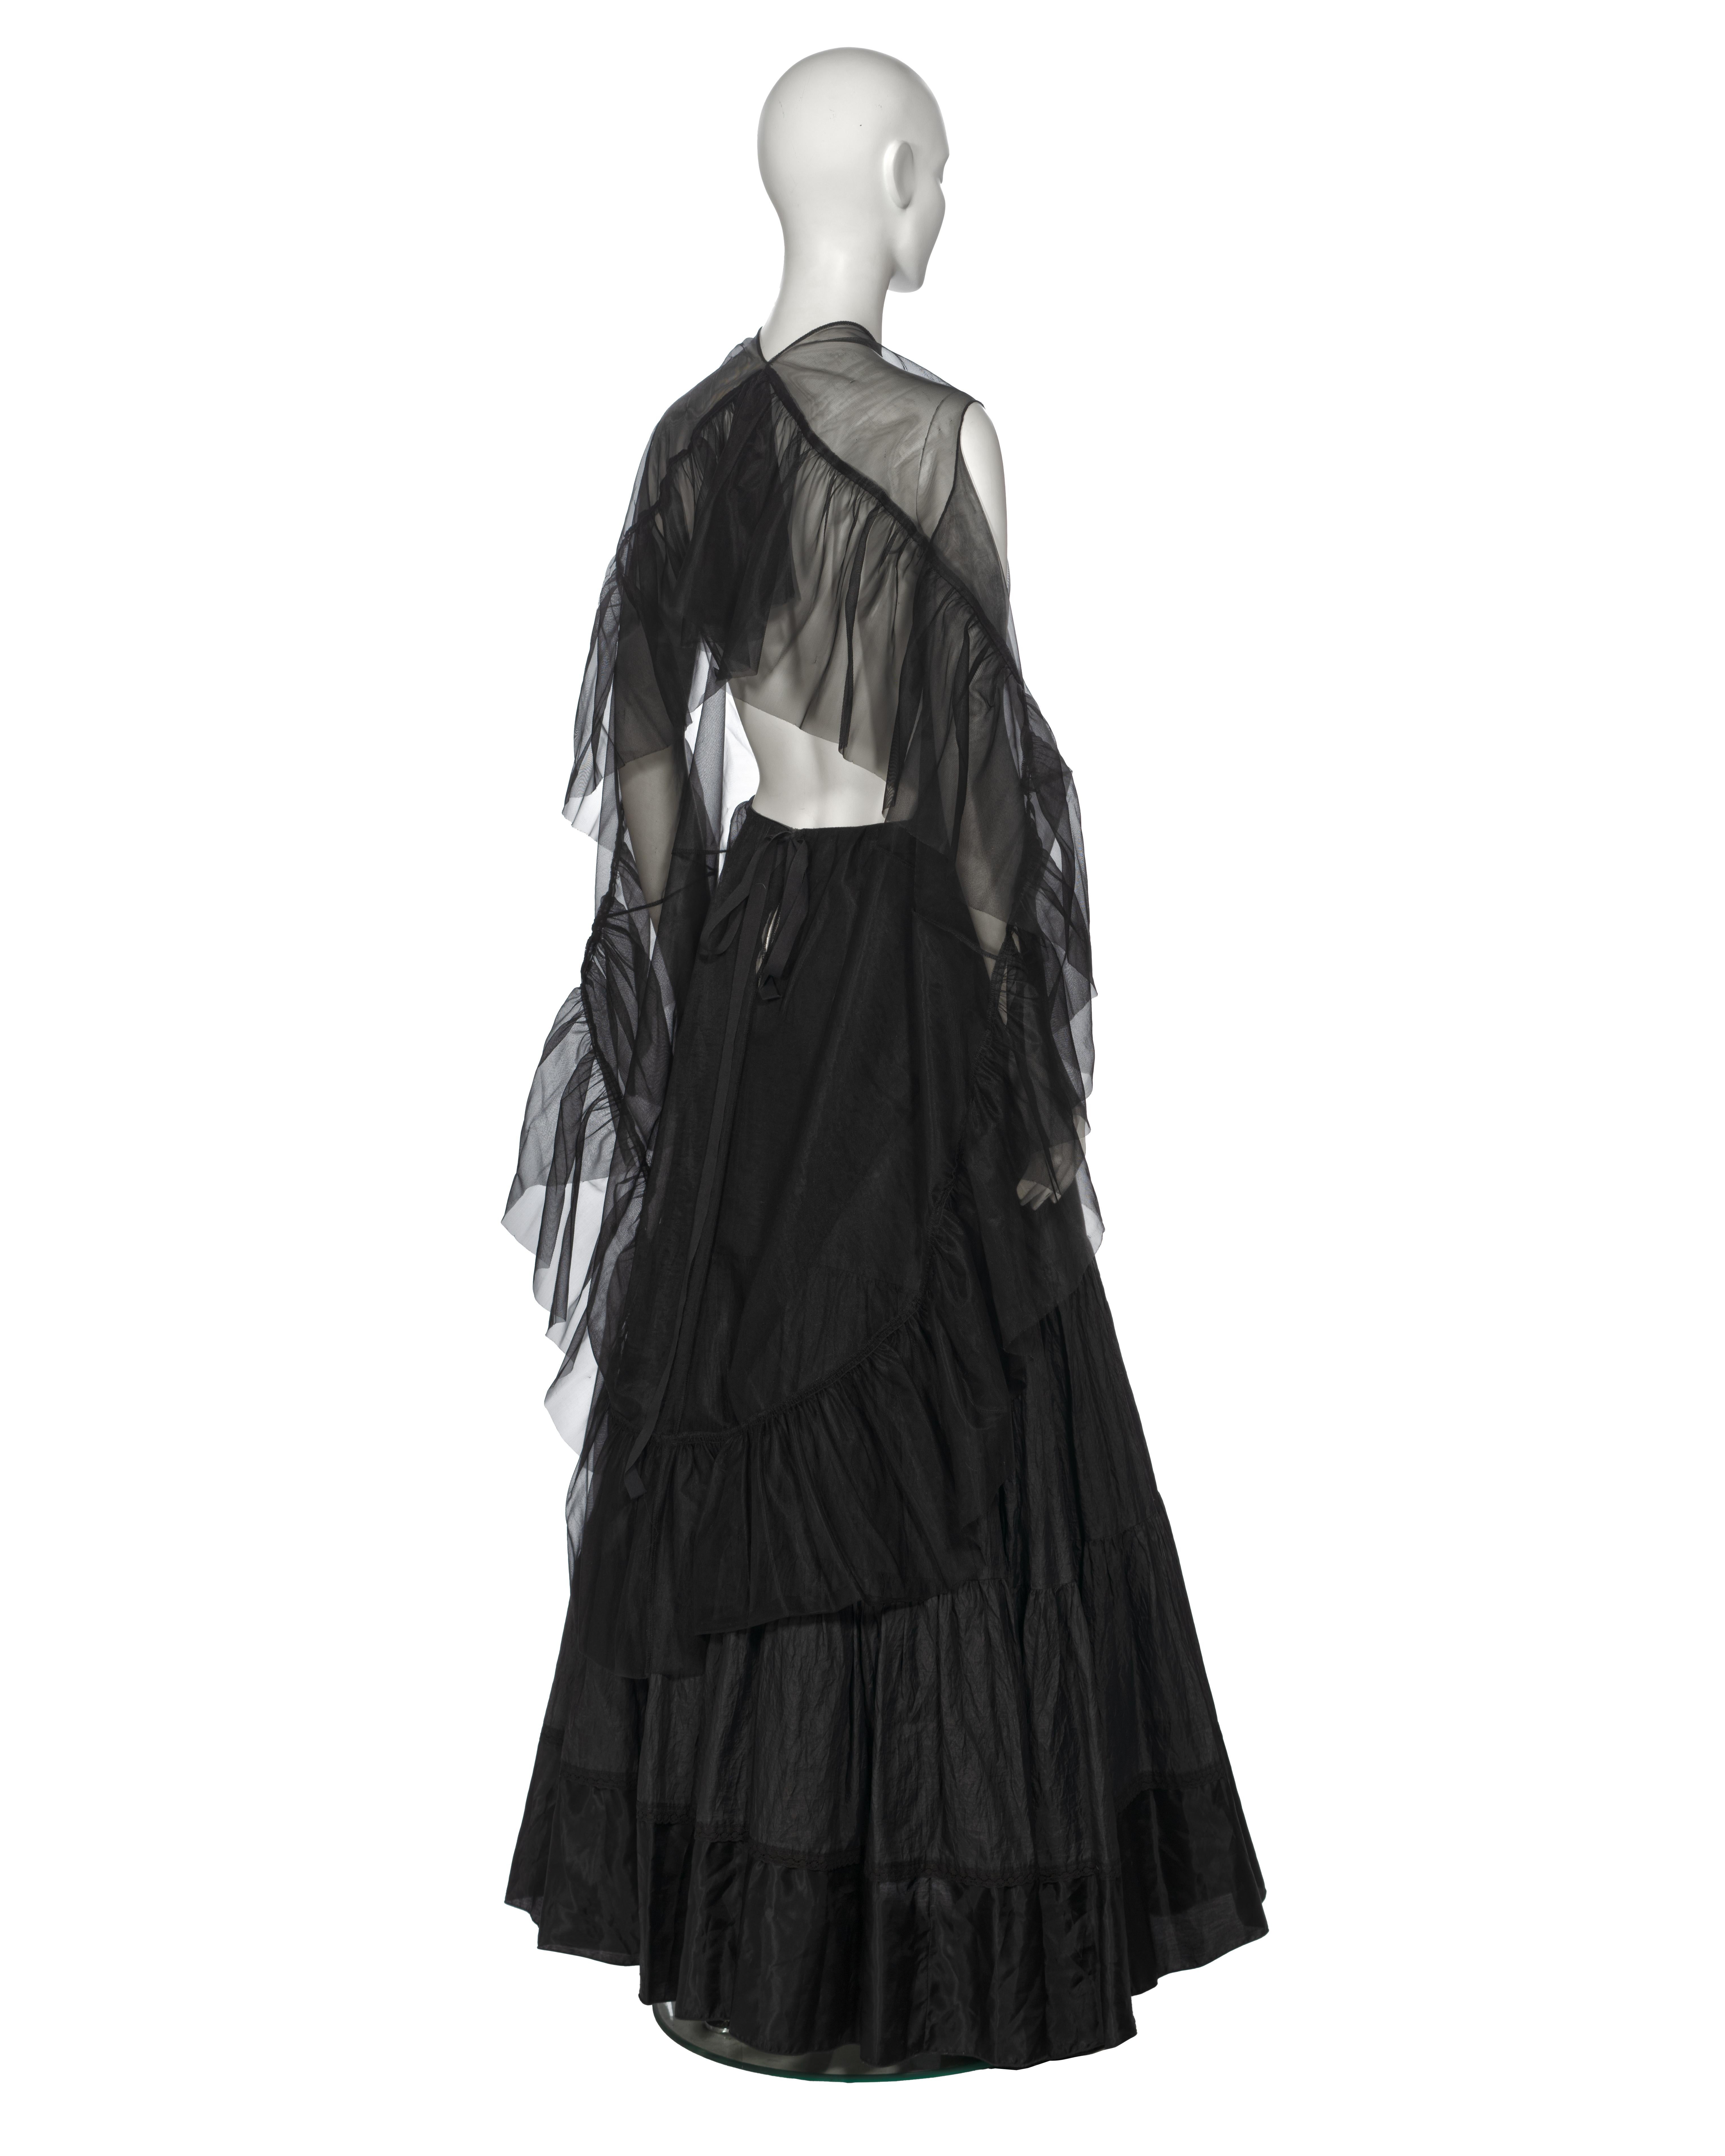 Martin Margiela Artisanal Evening Dress Made Out Of Vintage Petticoats, ss 2003 For Sale 12